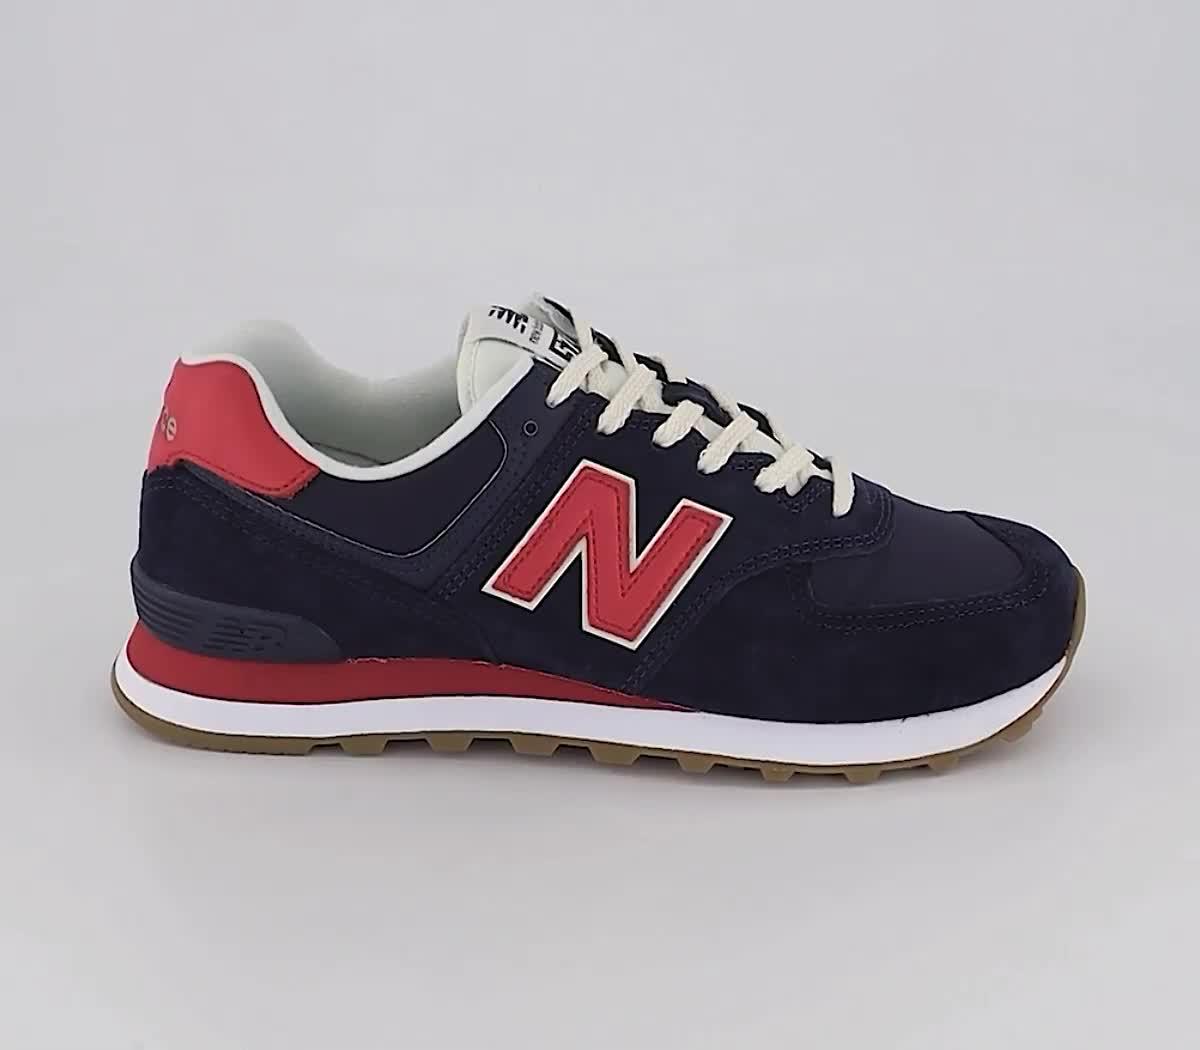 Brutaal steno Vooruitgaan New Balance 574 Trainers Navy Red - Men's Trainers